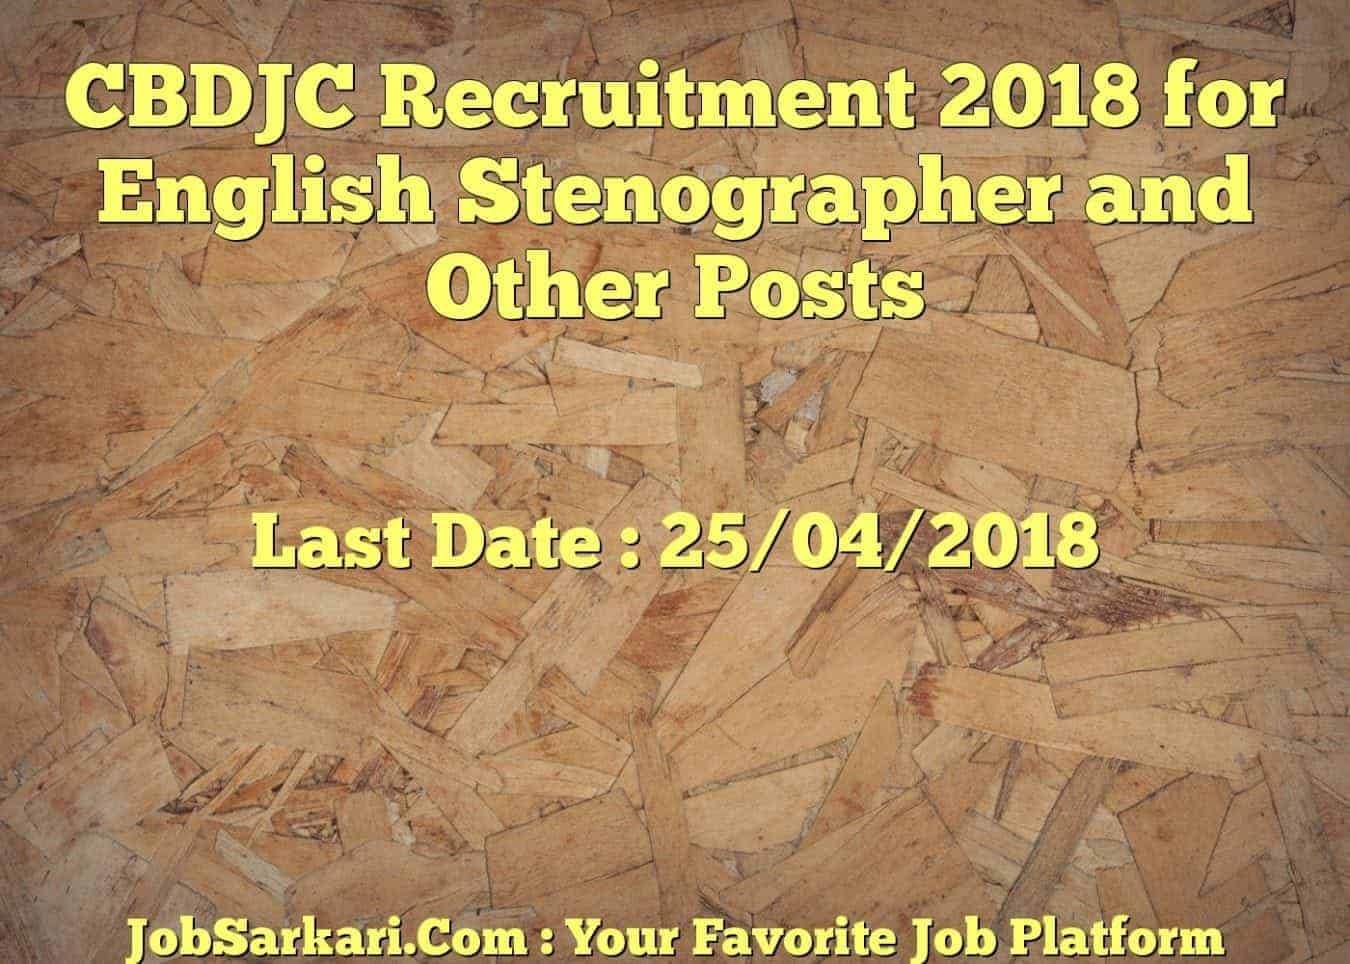 CBDJC Recruitment 2018 for English Stenographer and Other Posts